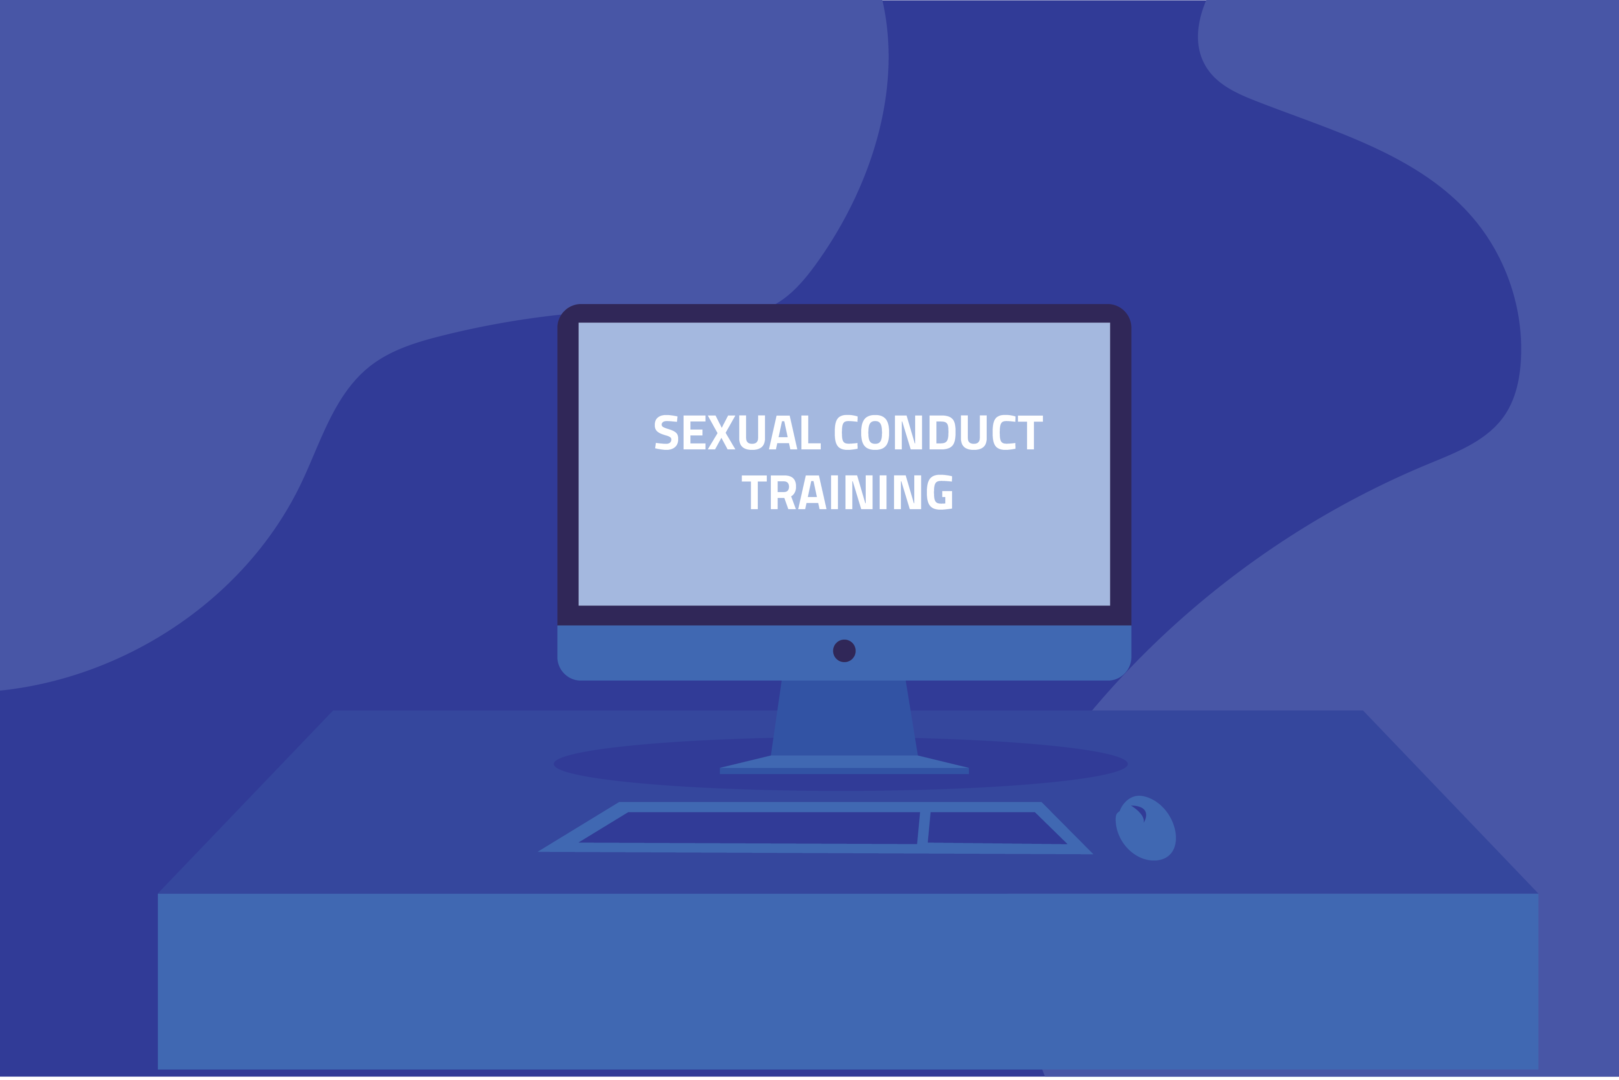 The New Sexual Misconduct Training Validates Victims The Cougar 0047